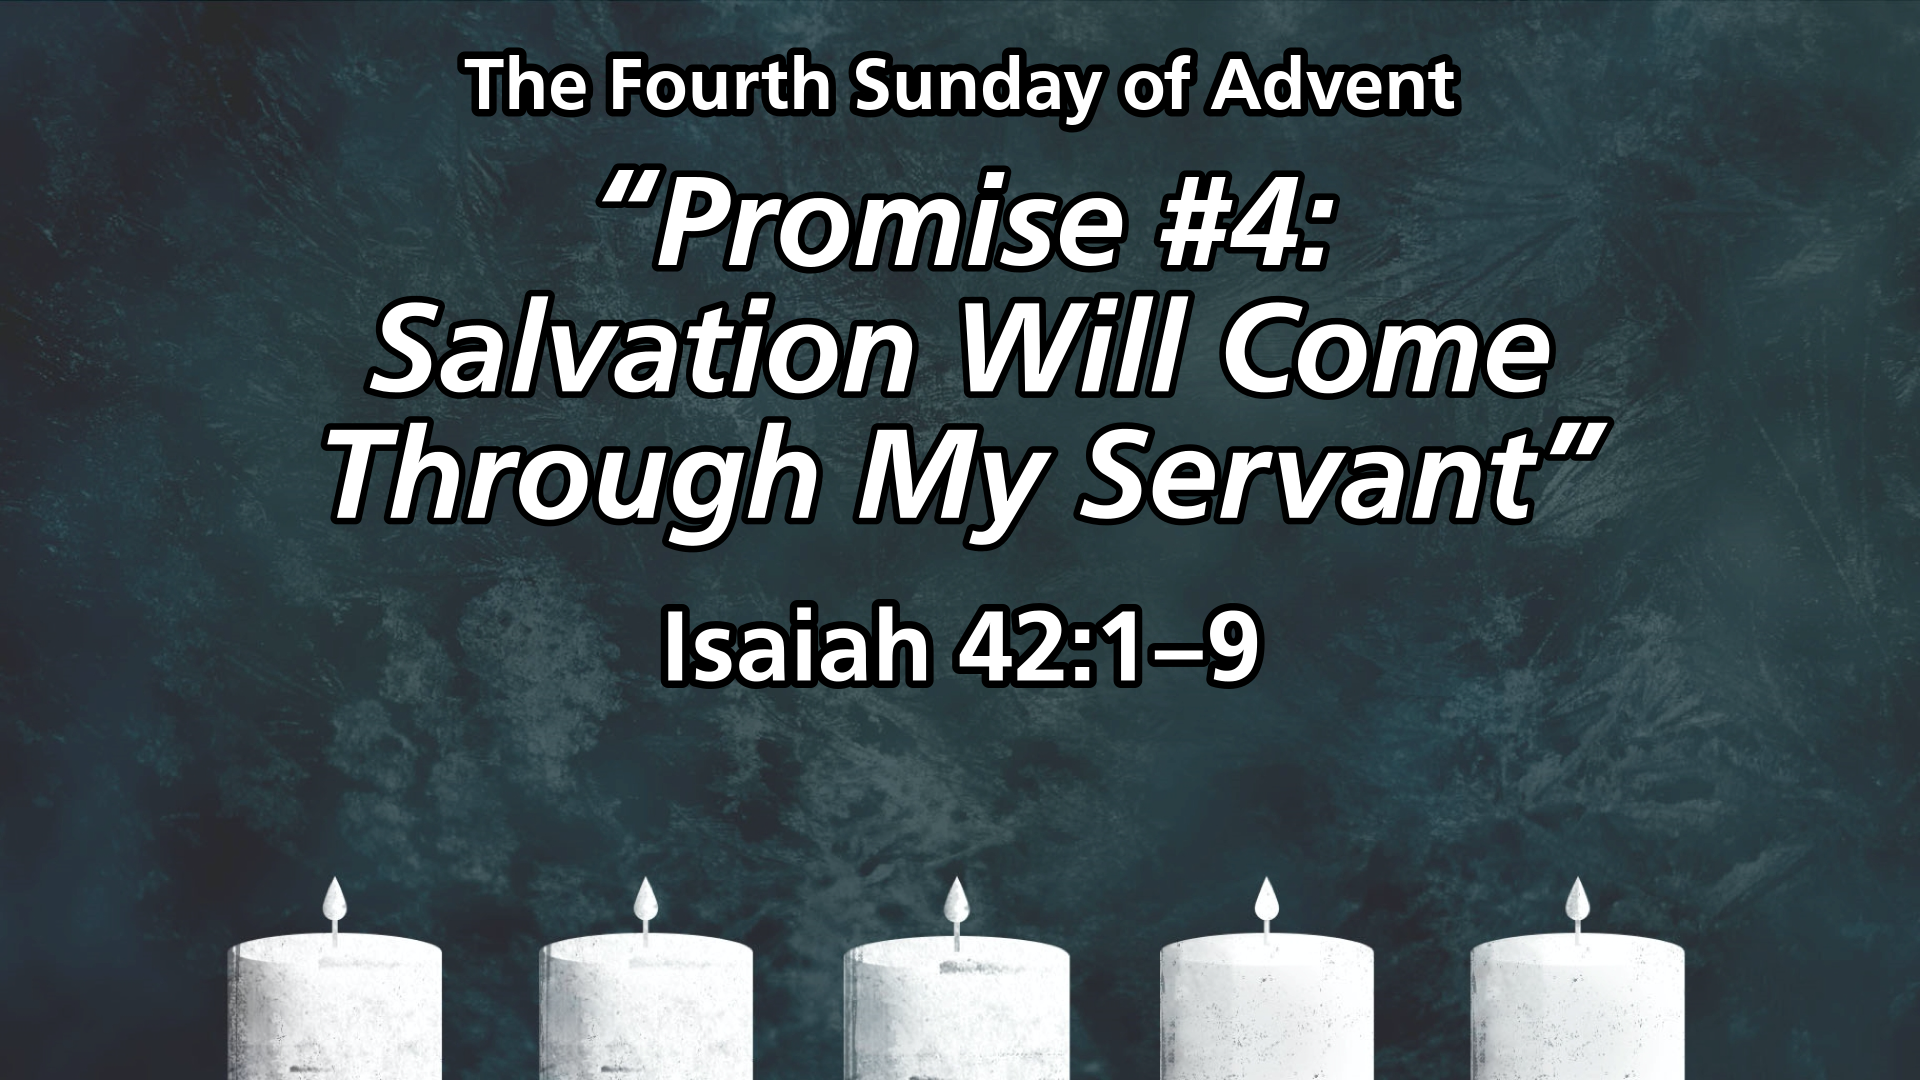 “Promise #4: Salvation Will Come Through My Servant”